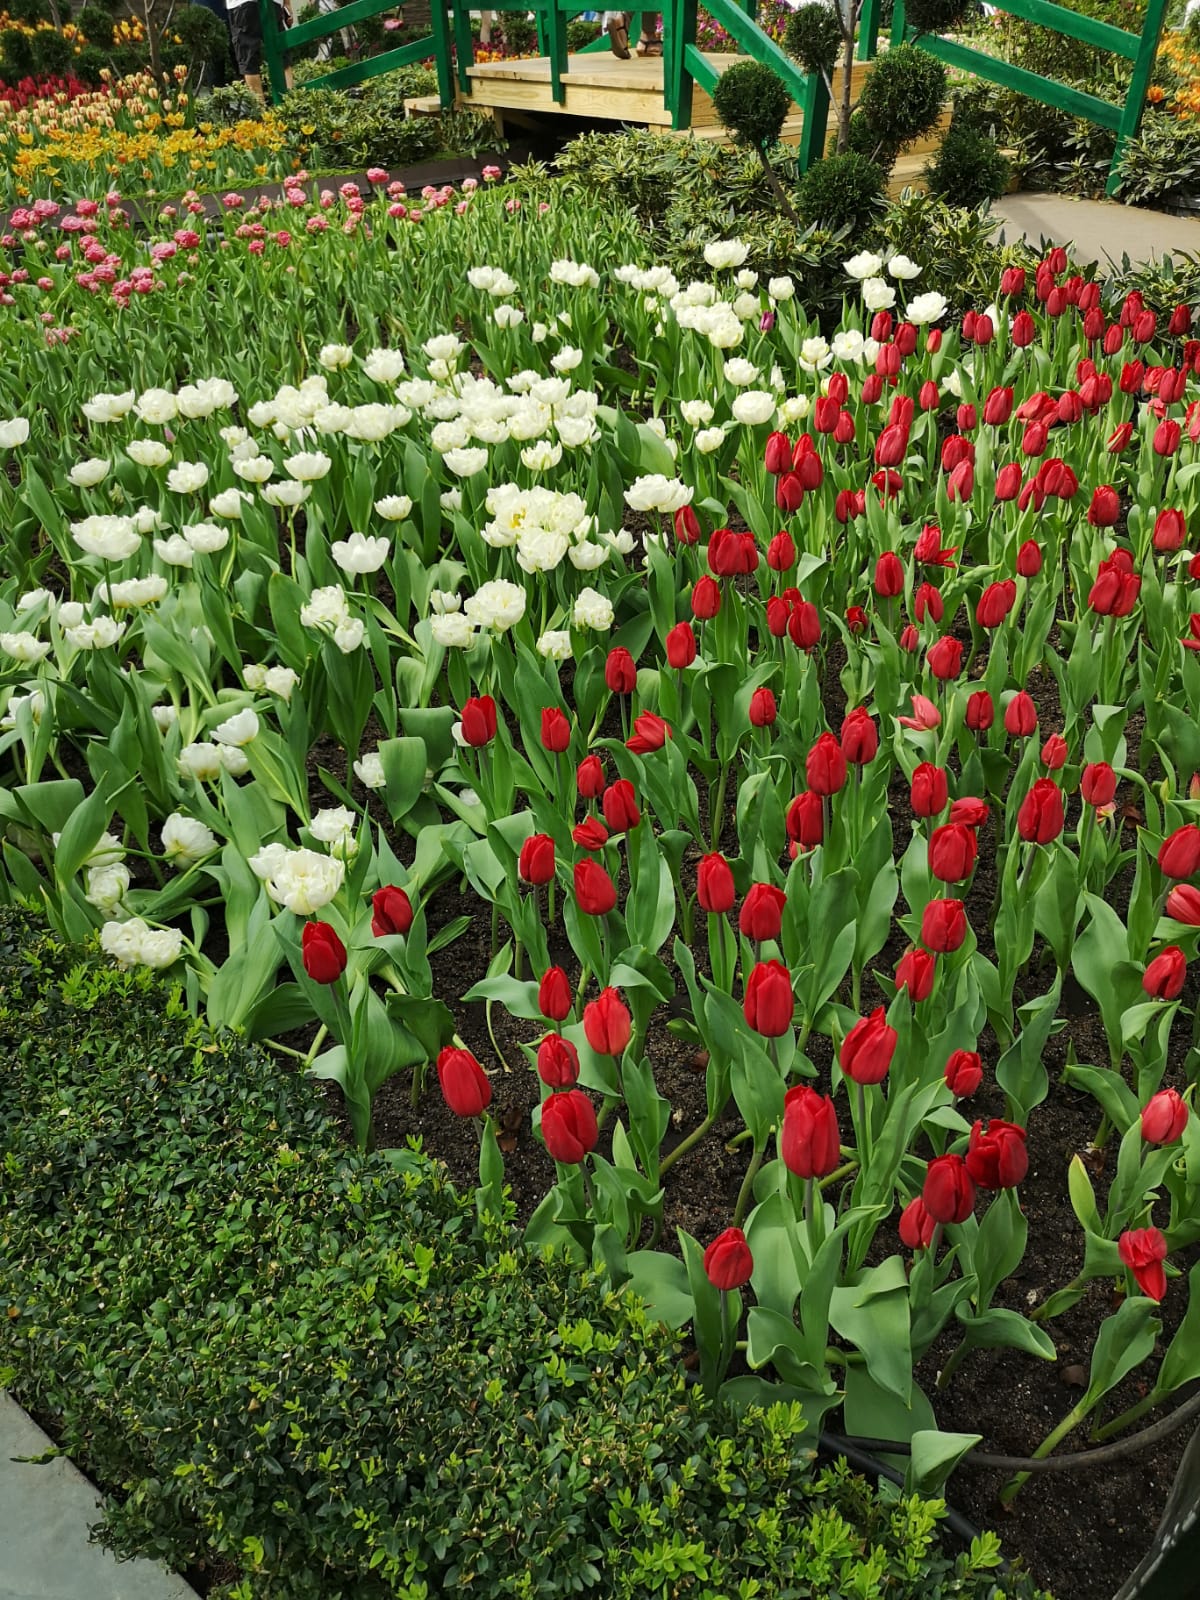 Tulips, red & white